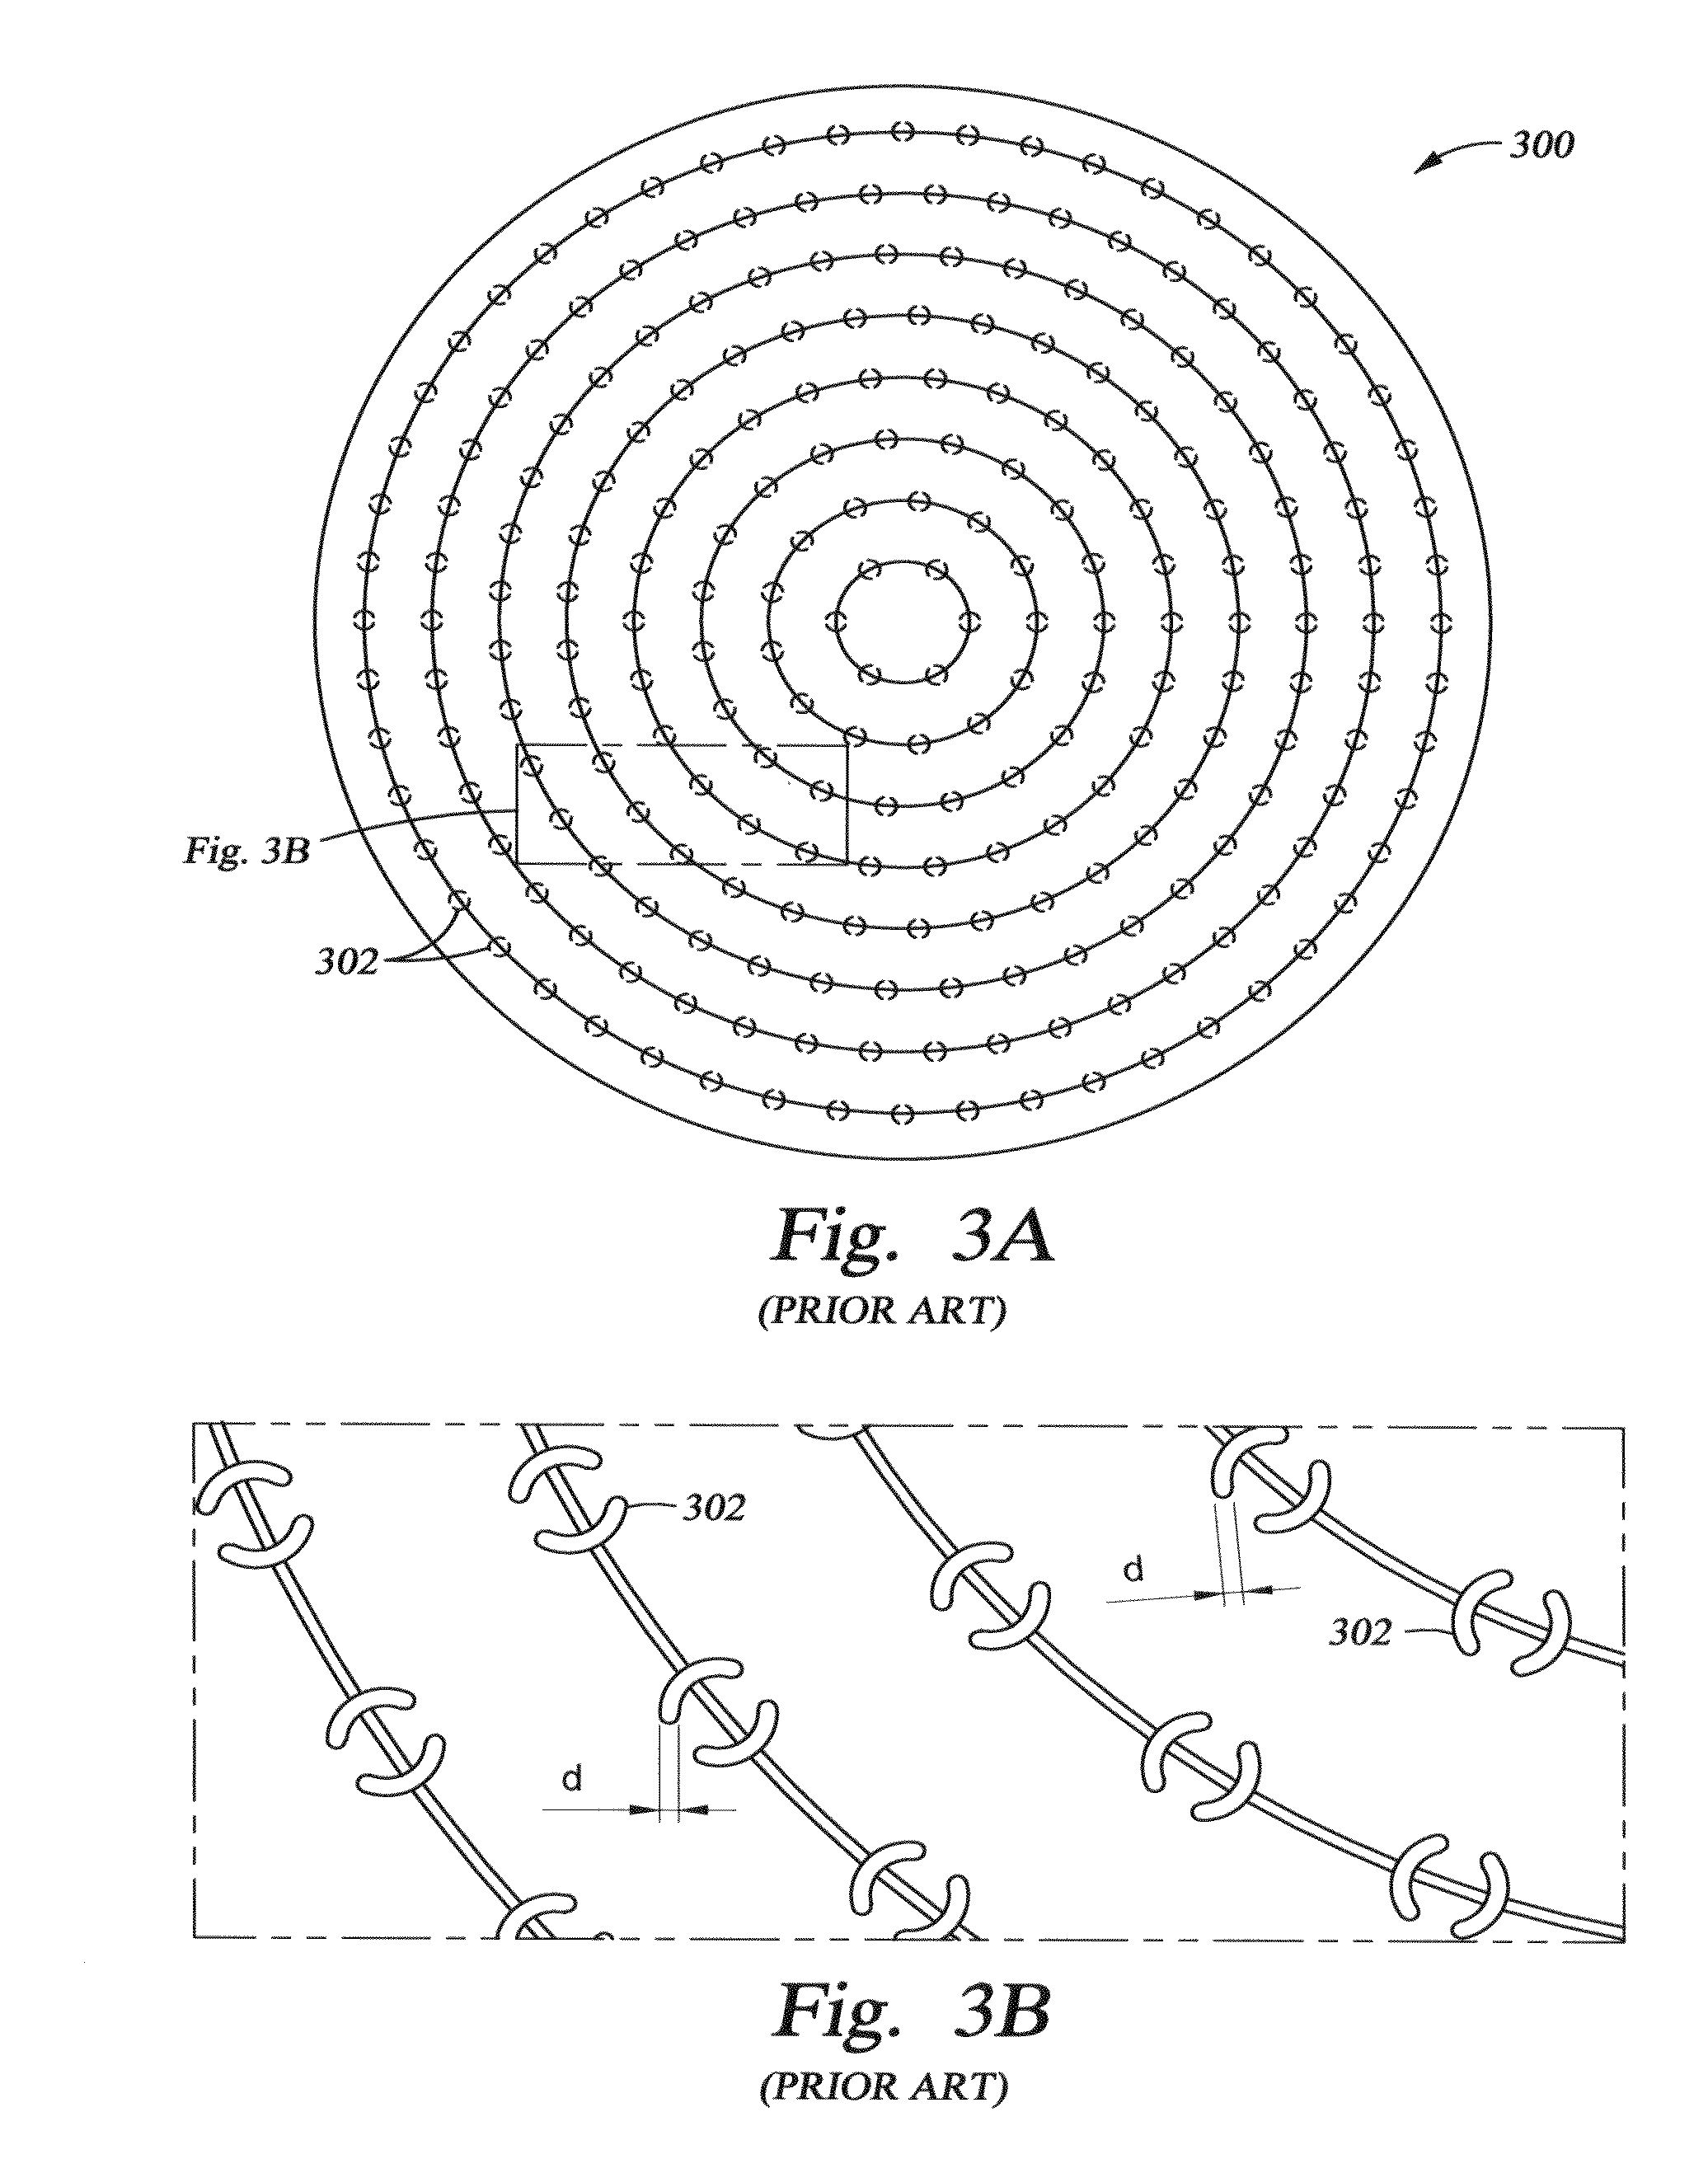 Chemical treatment to reduce machining-induced sub-surface damage in semiconductor processing components comprising silicon carbide